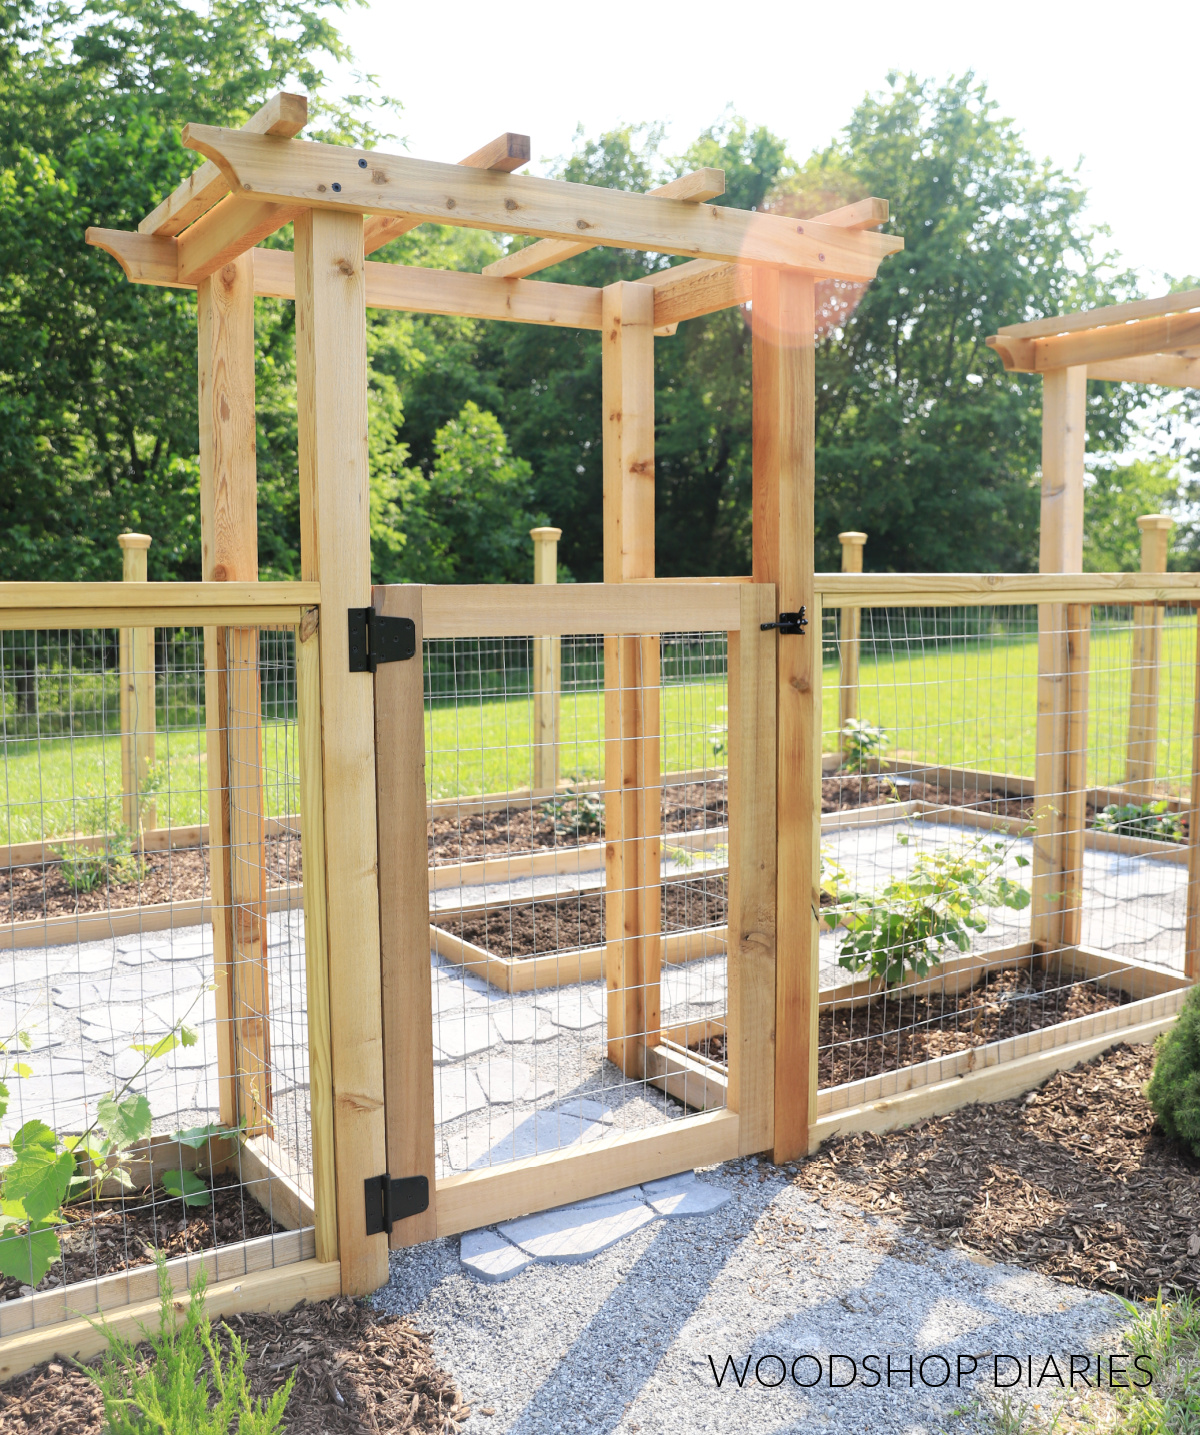 Garden arbor with gate as entrance to fenced garden area with raised beds